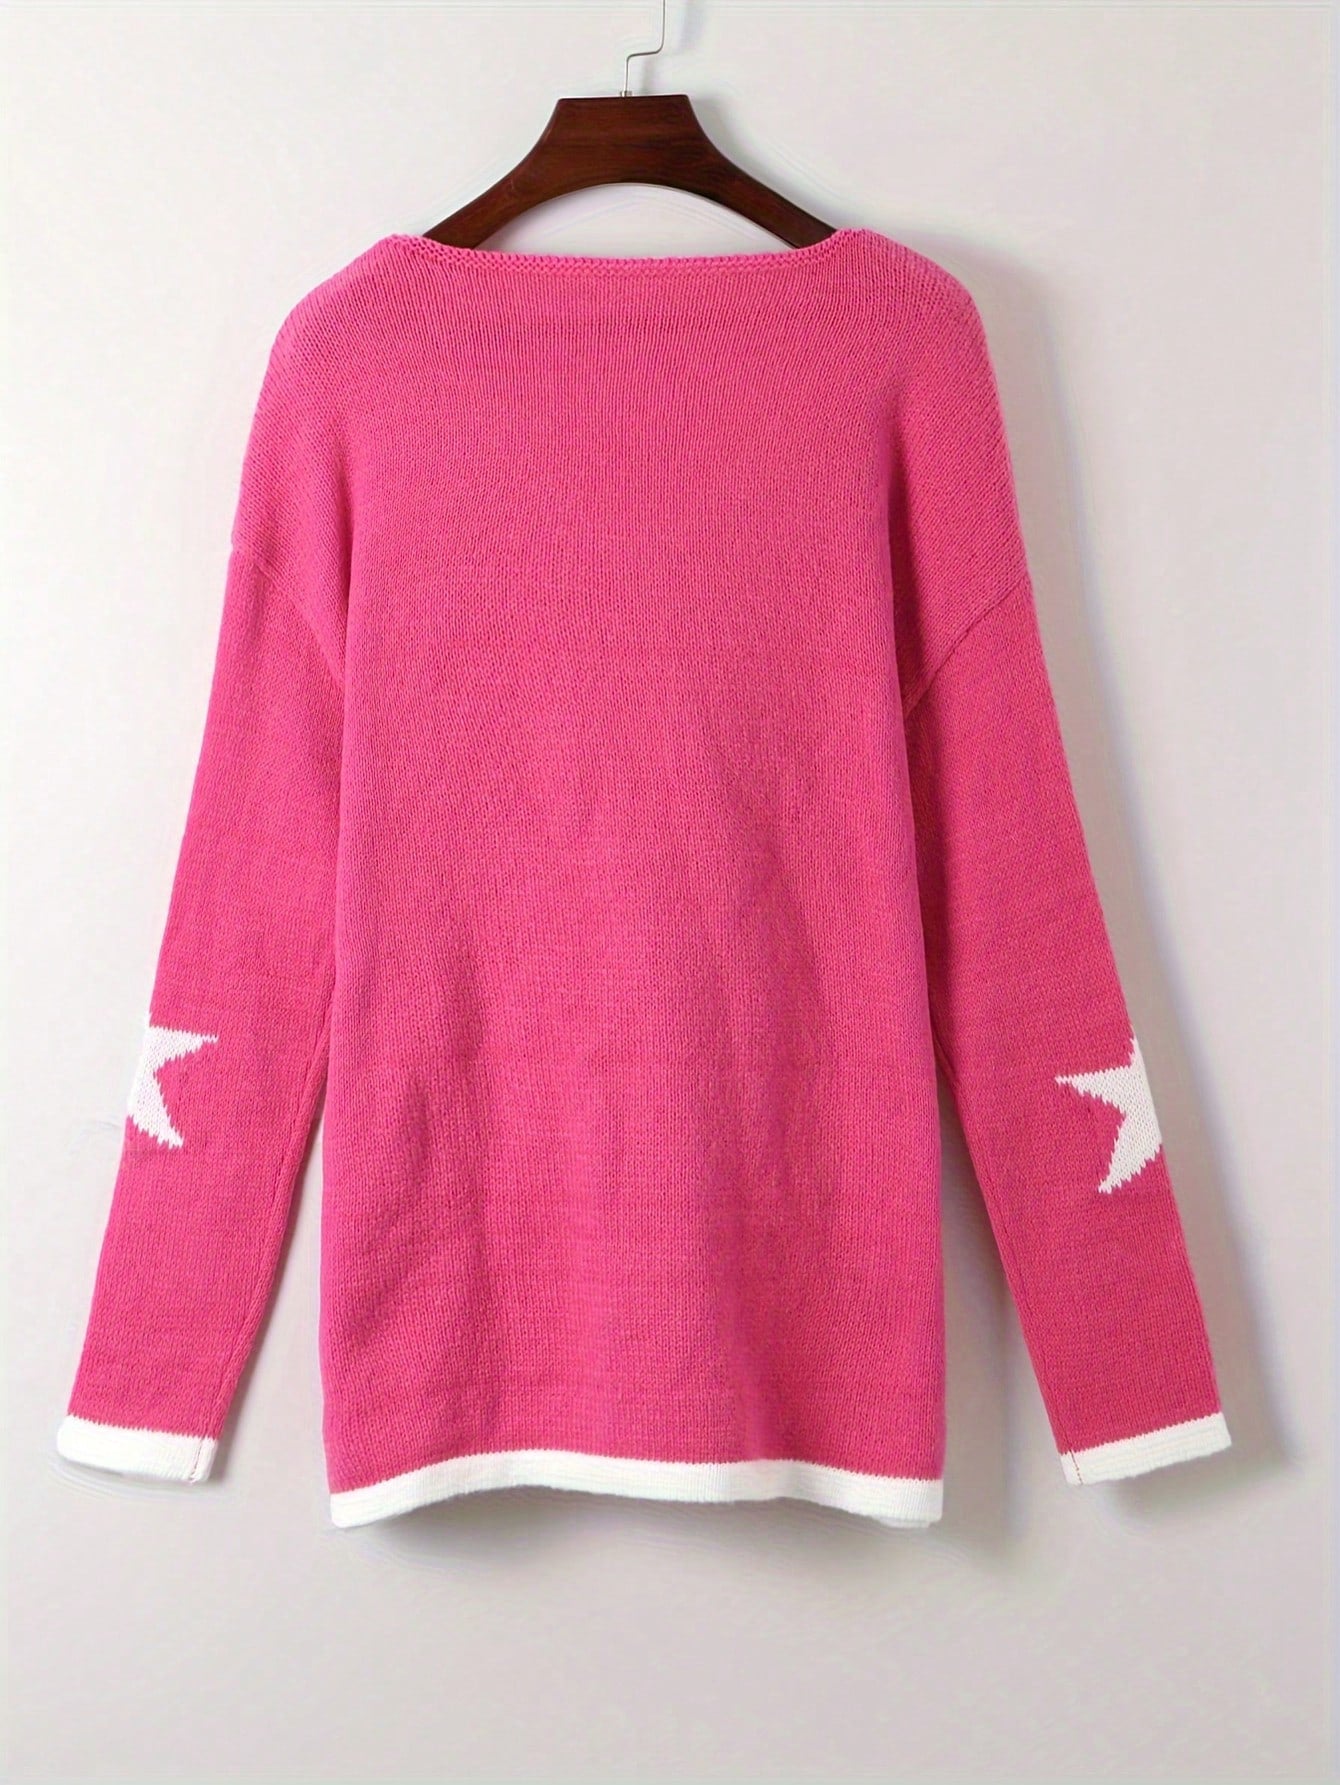 New Arrival Casual Plus Size Women's Star Pattern Pullover Sweater For Autumn/Winter